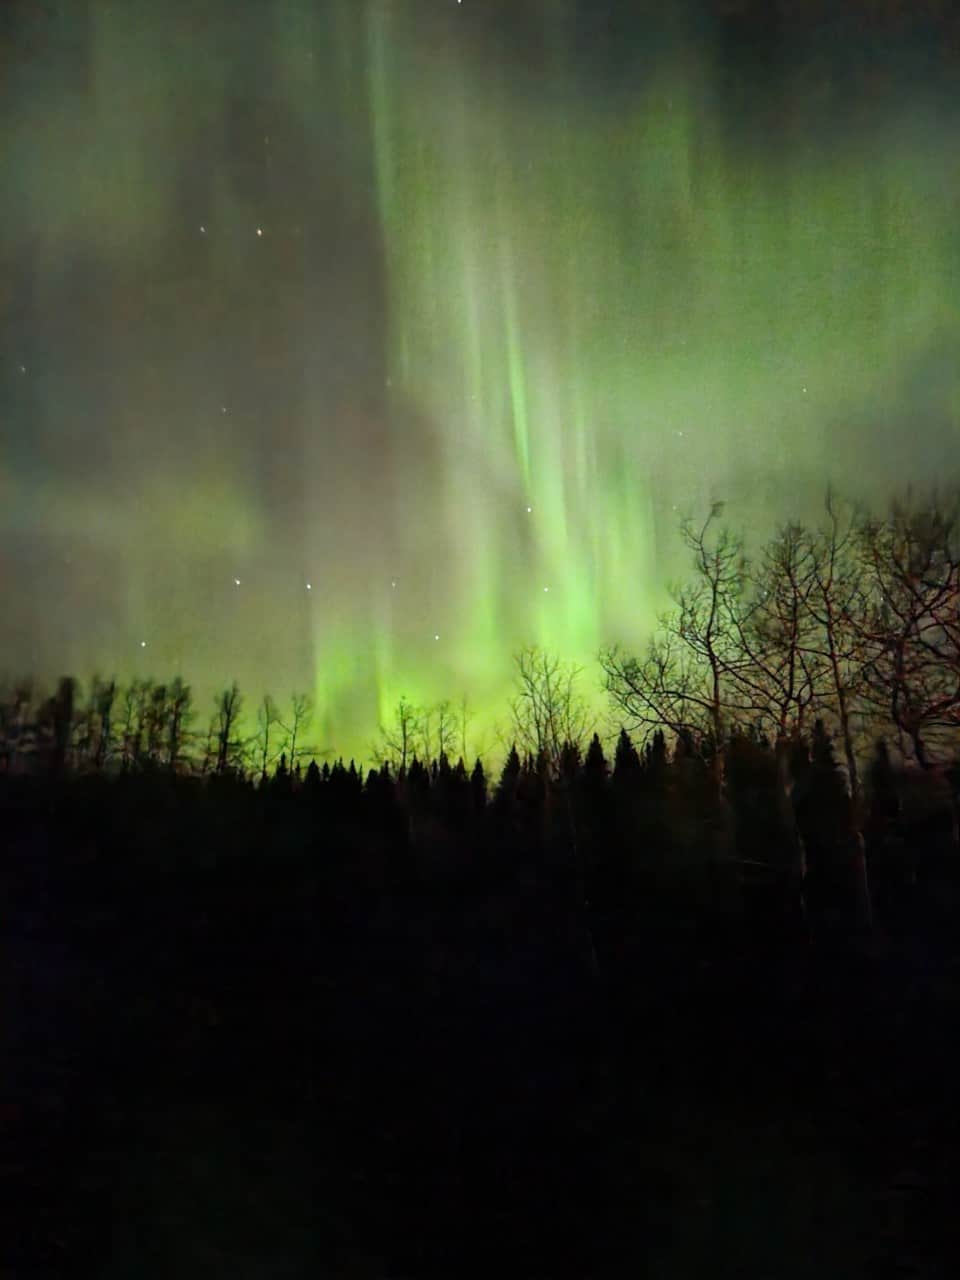 Drive Into the Darkness for Best Viewing Advantage  - If you have a vehicle, or know someone who would be up for an Aurora adventure, it's best to get out of the cities or towns and away from as much light pollution as possible to view the Northern Lights in Canada 